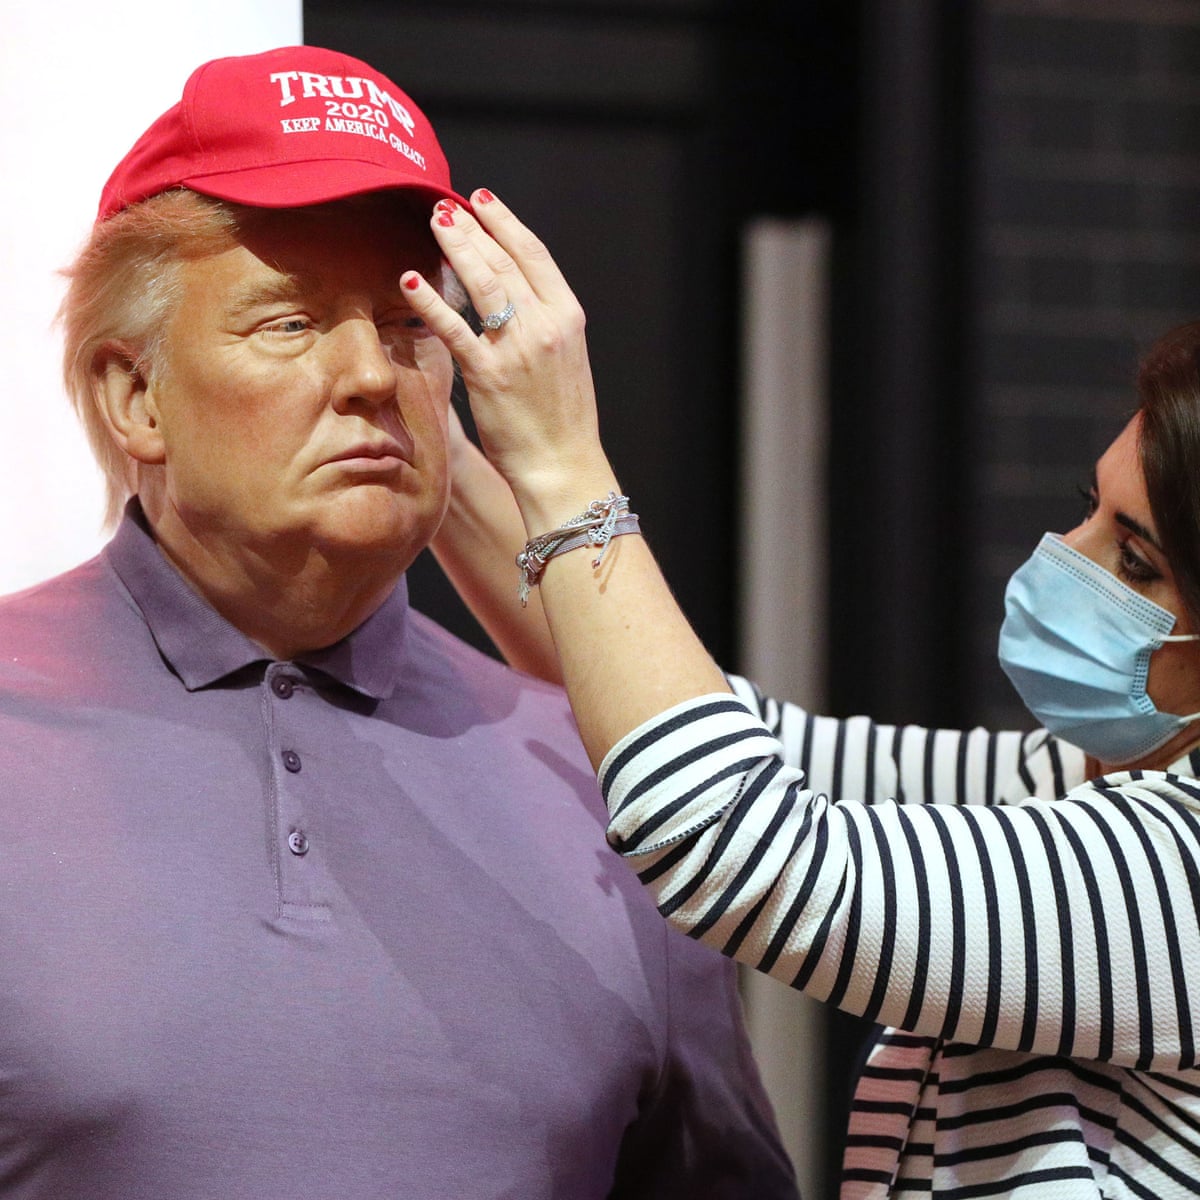 Trump wax figure pulled from Texas display after visitors attacked it –  reports, Donald Trump